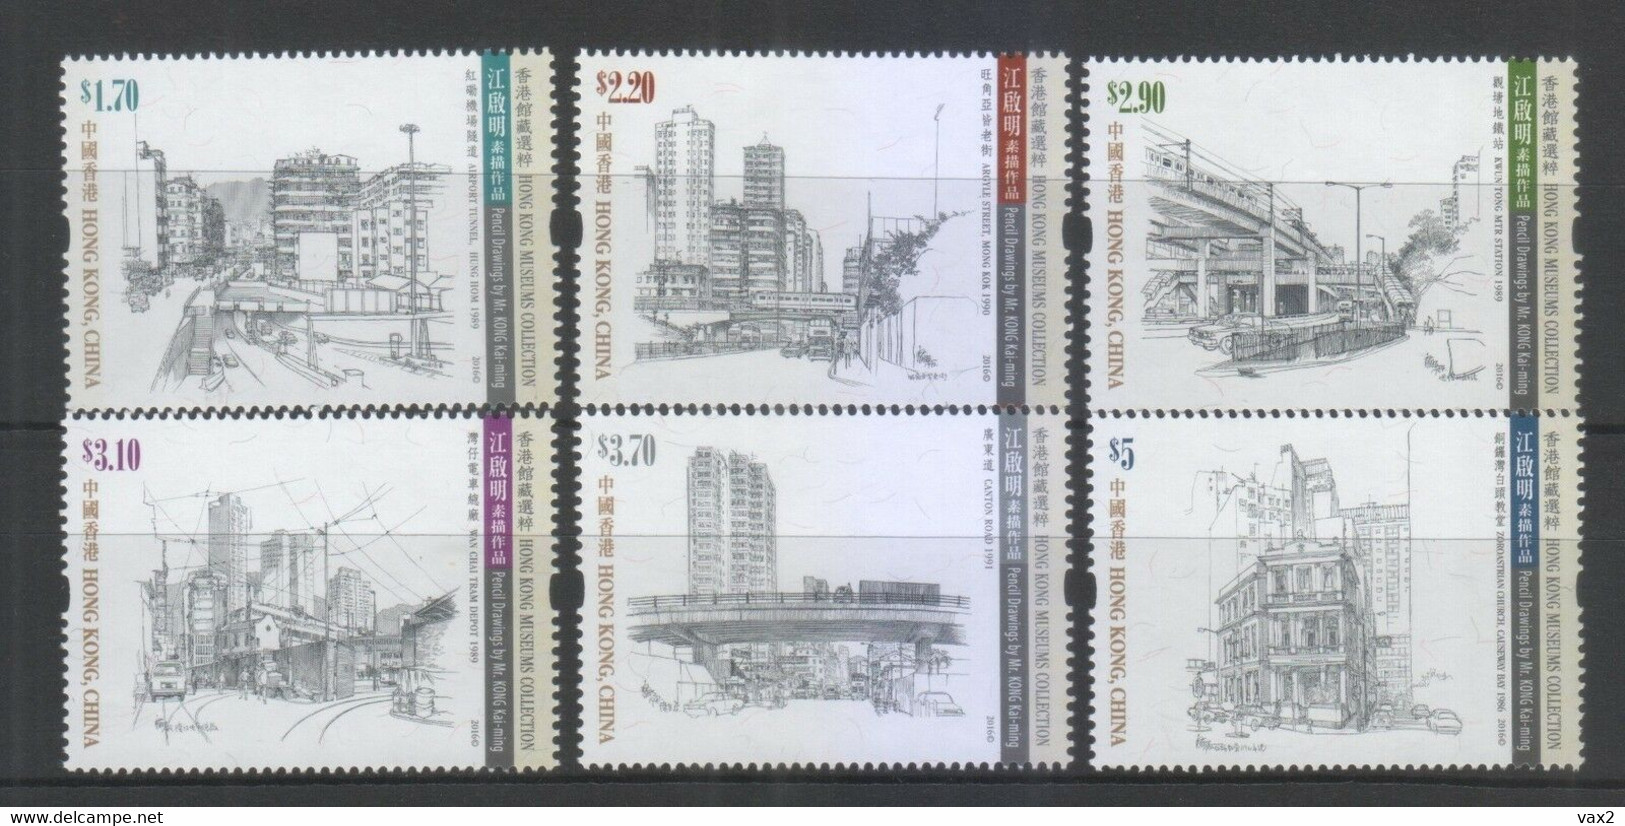 Hong Kong 2016 S#1821-1826 Pencil Drawings By Mr. Kong Kai-ming MNH Painting Transport Automobile Train Bus Tram Truck - Unused Stamps